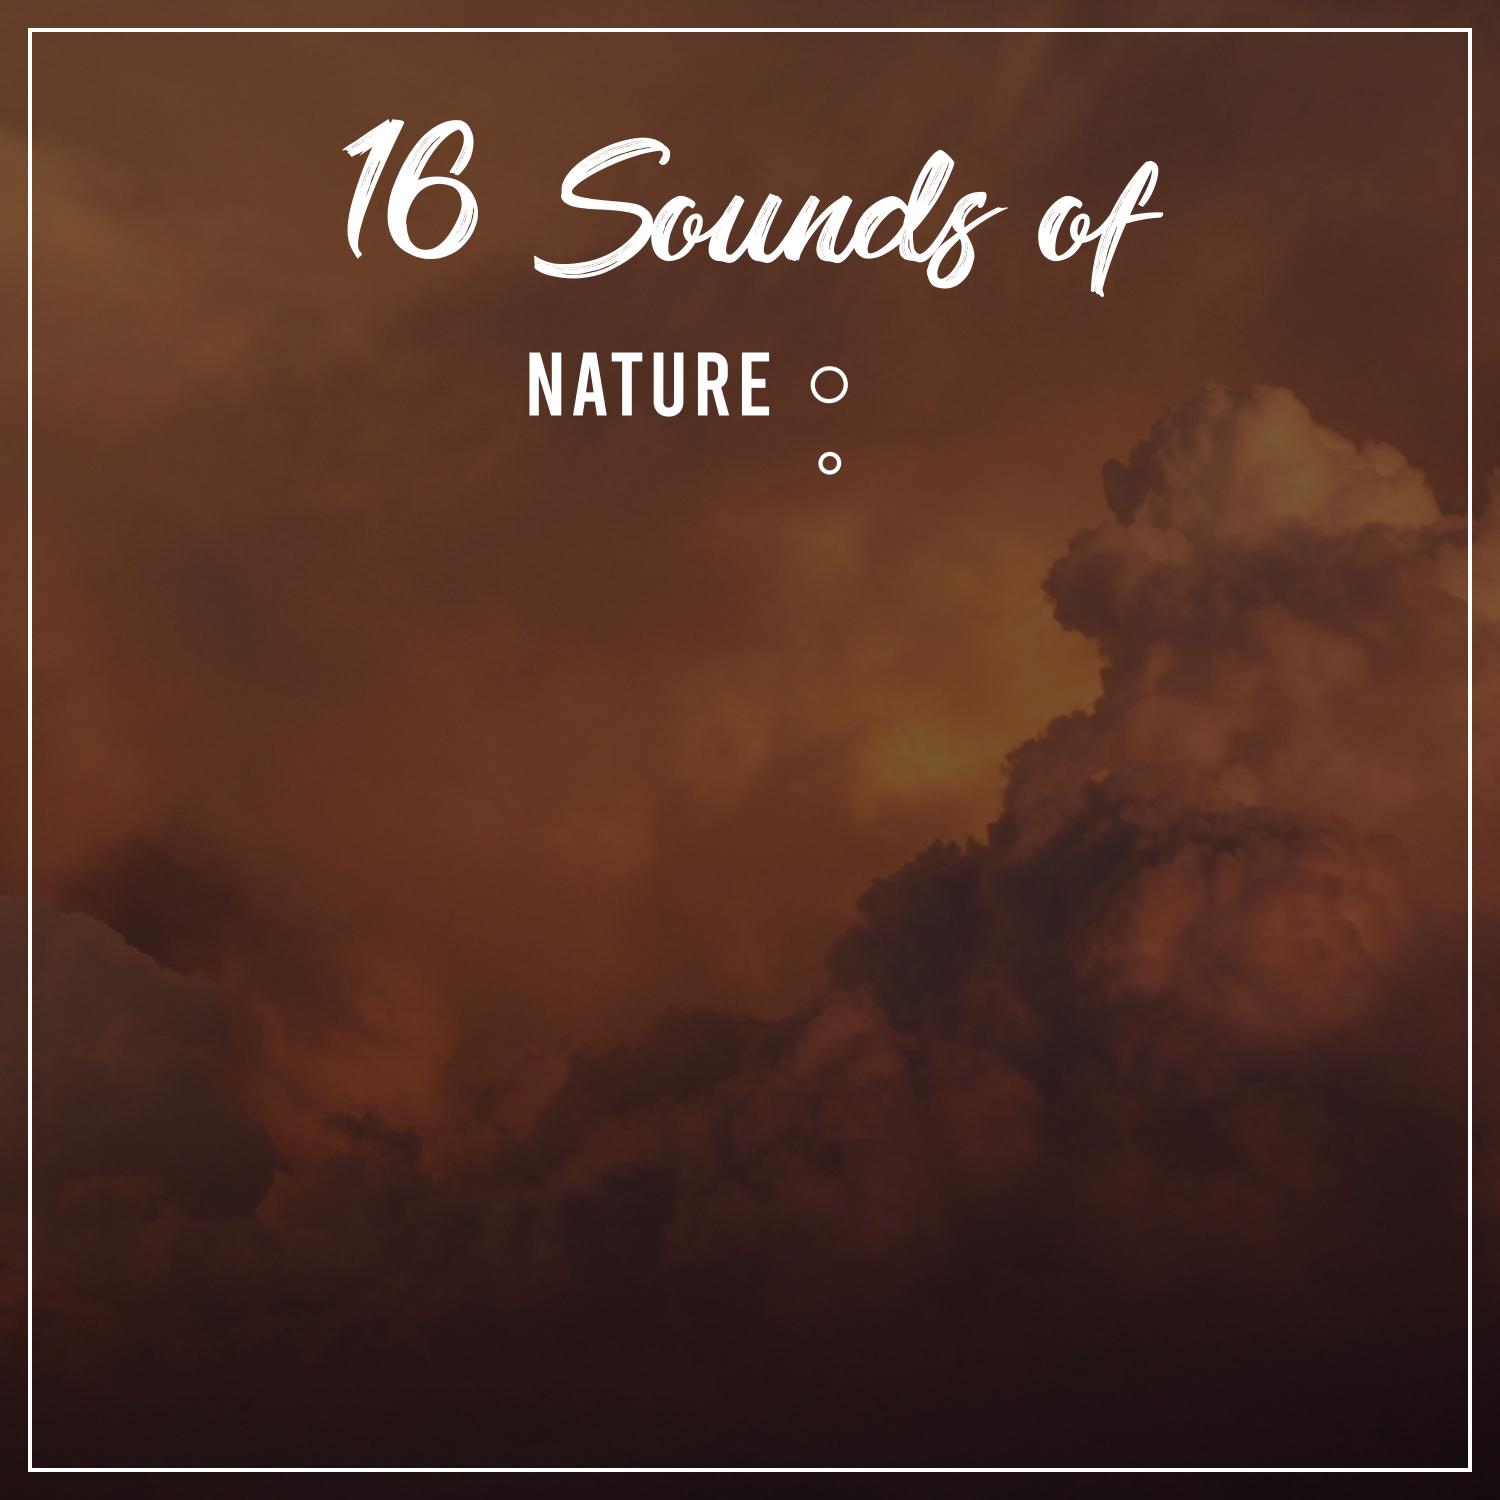 16 Sounds of Nature: Relaxing Sleep Sounds of Nature, Rainfall for Sleep, Loopable Rain, White Noise, Insomnia Sleep Aid